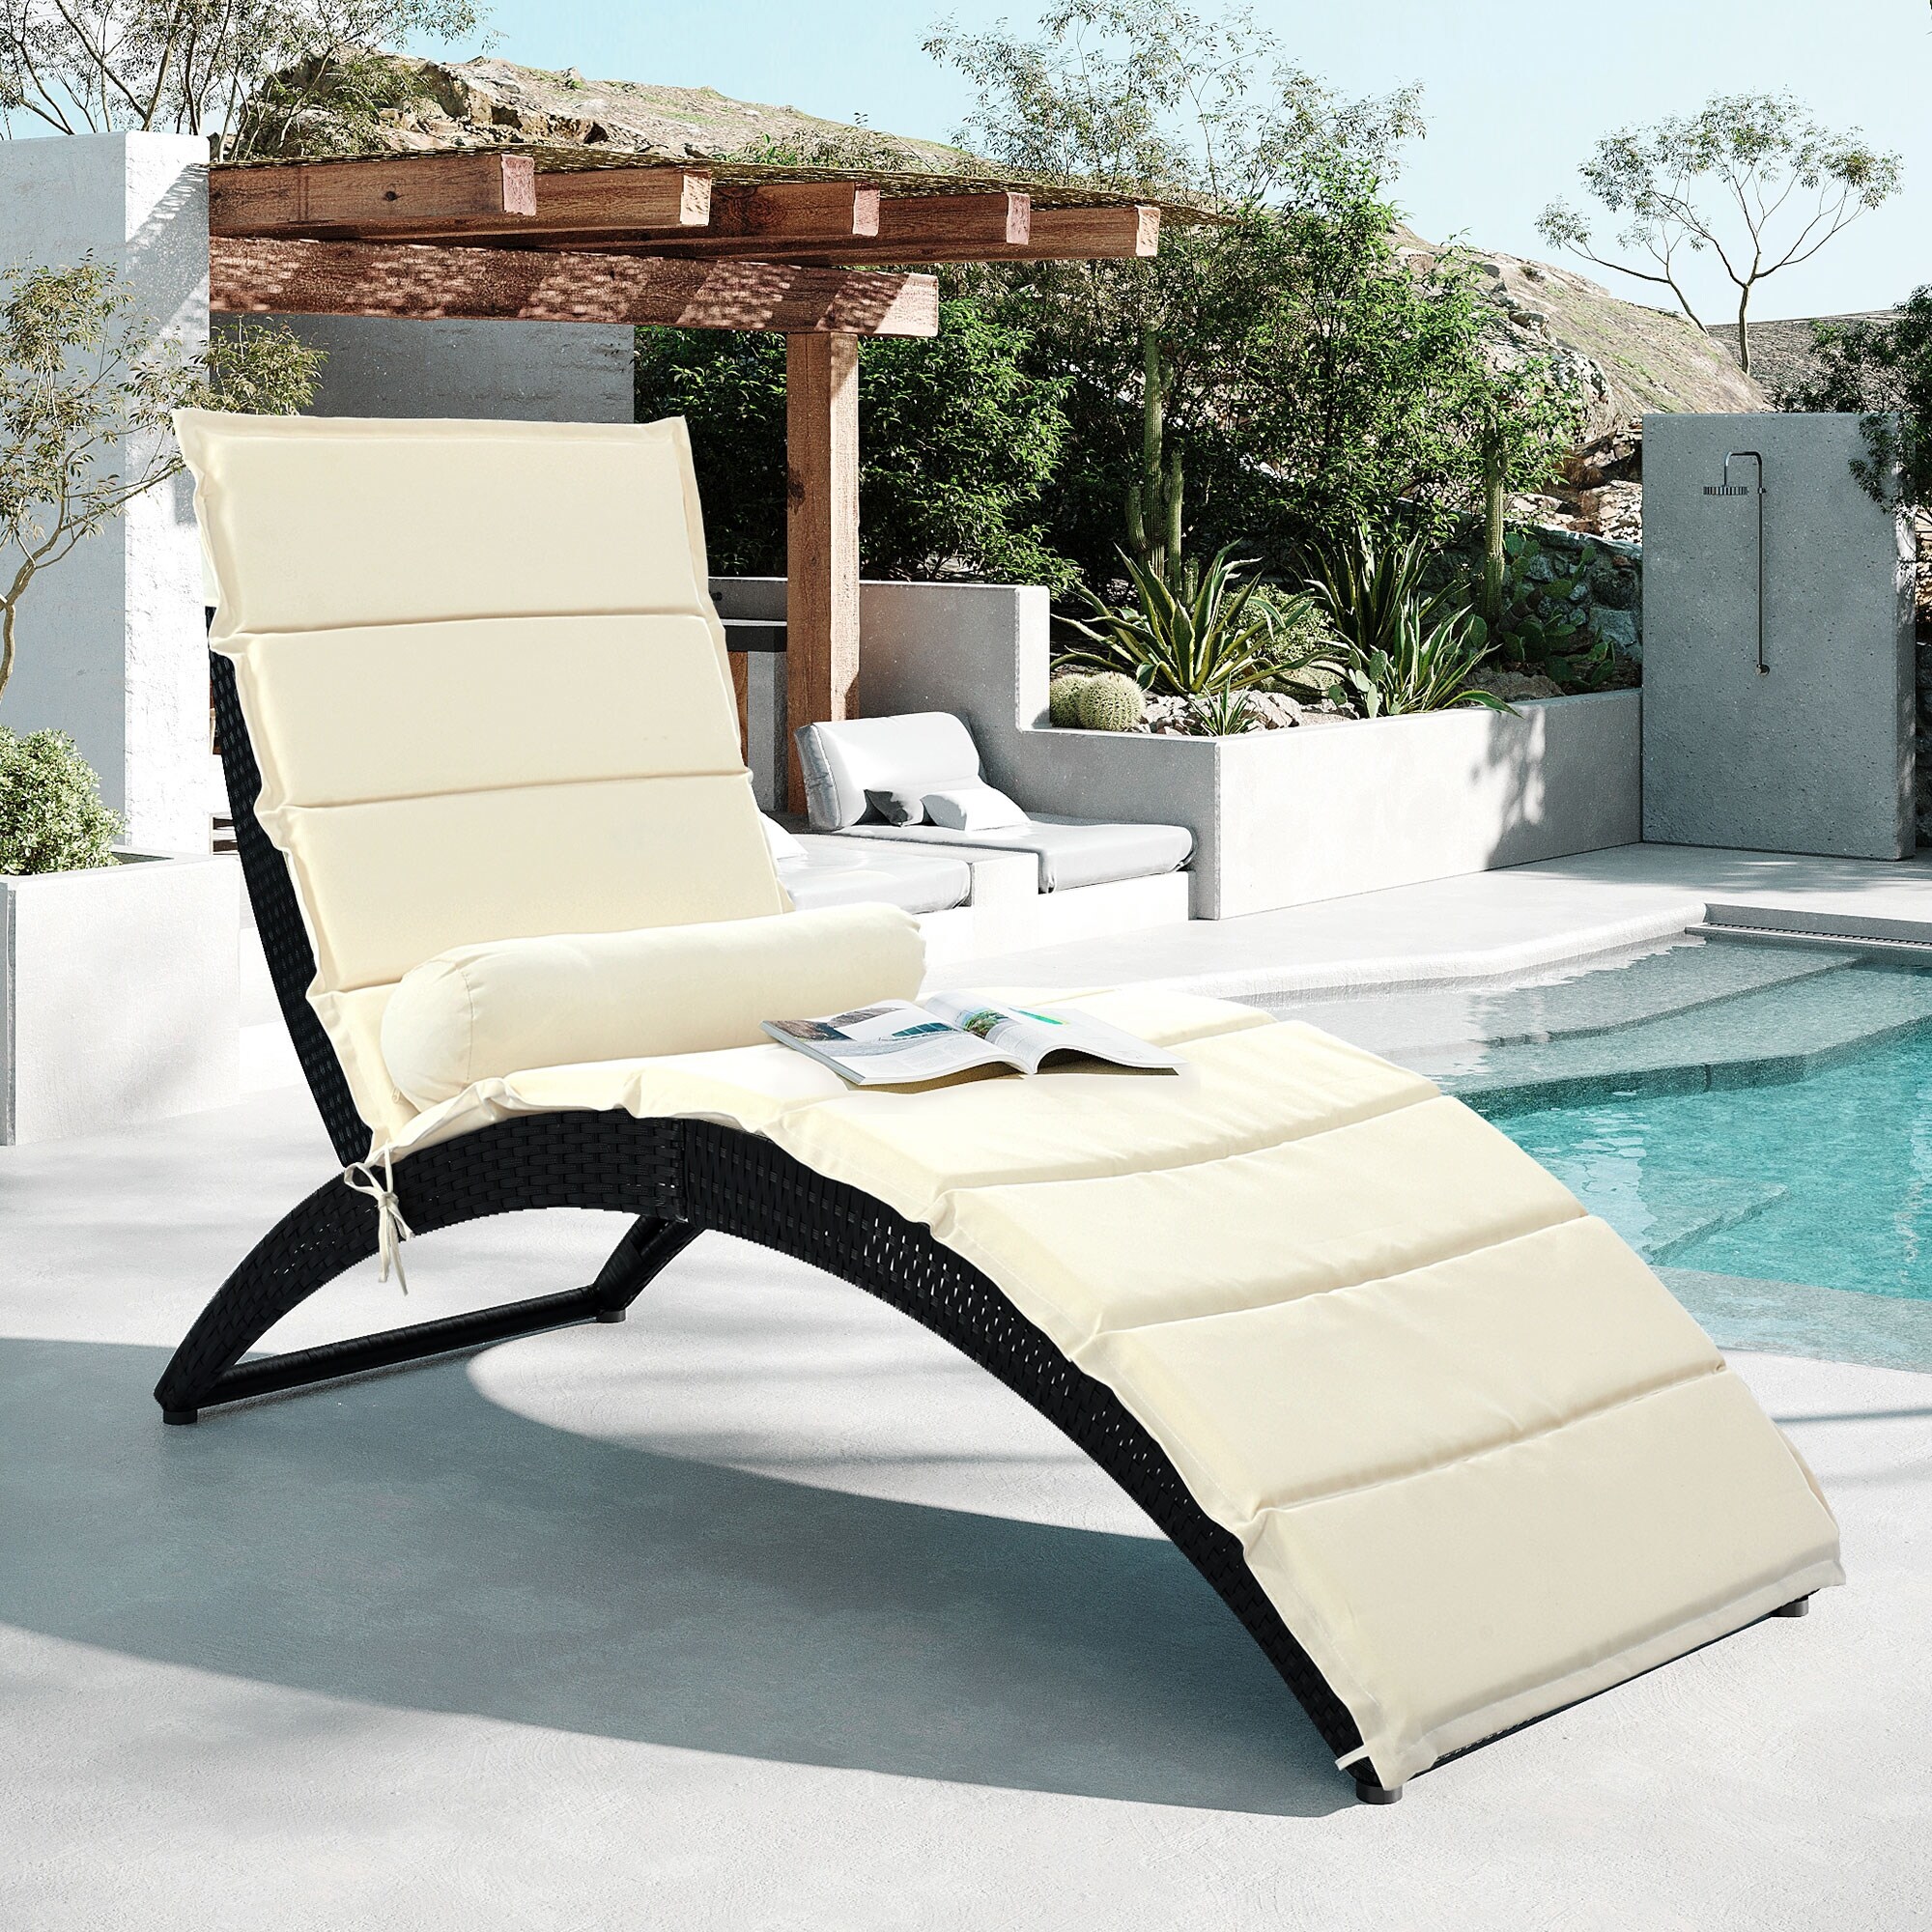 Patio Wicker Sun Lounger  Pe Rattan Foldable Chaise Lounger With Bolster Pillow (1 Sets)